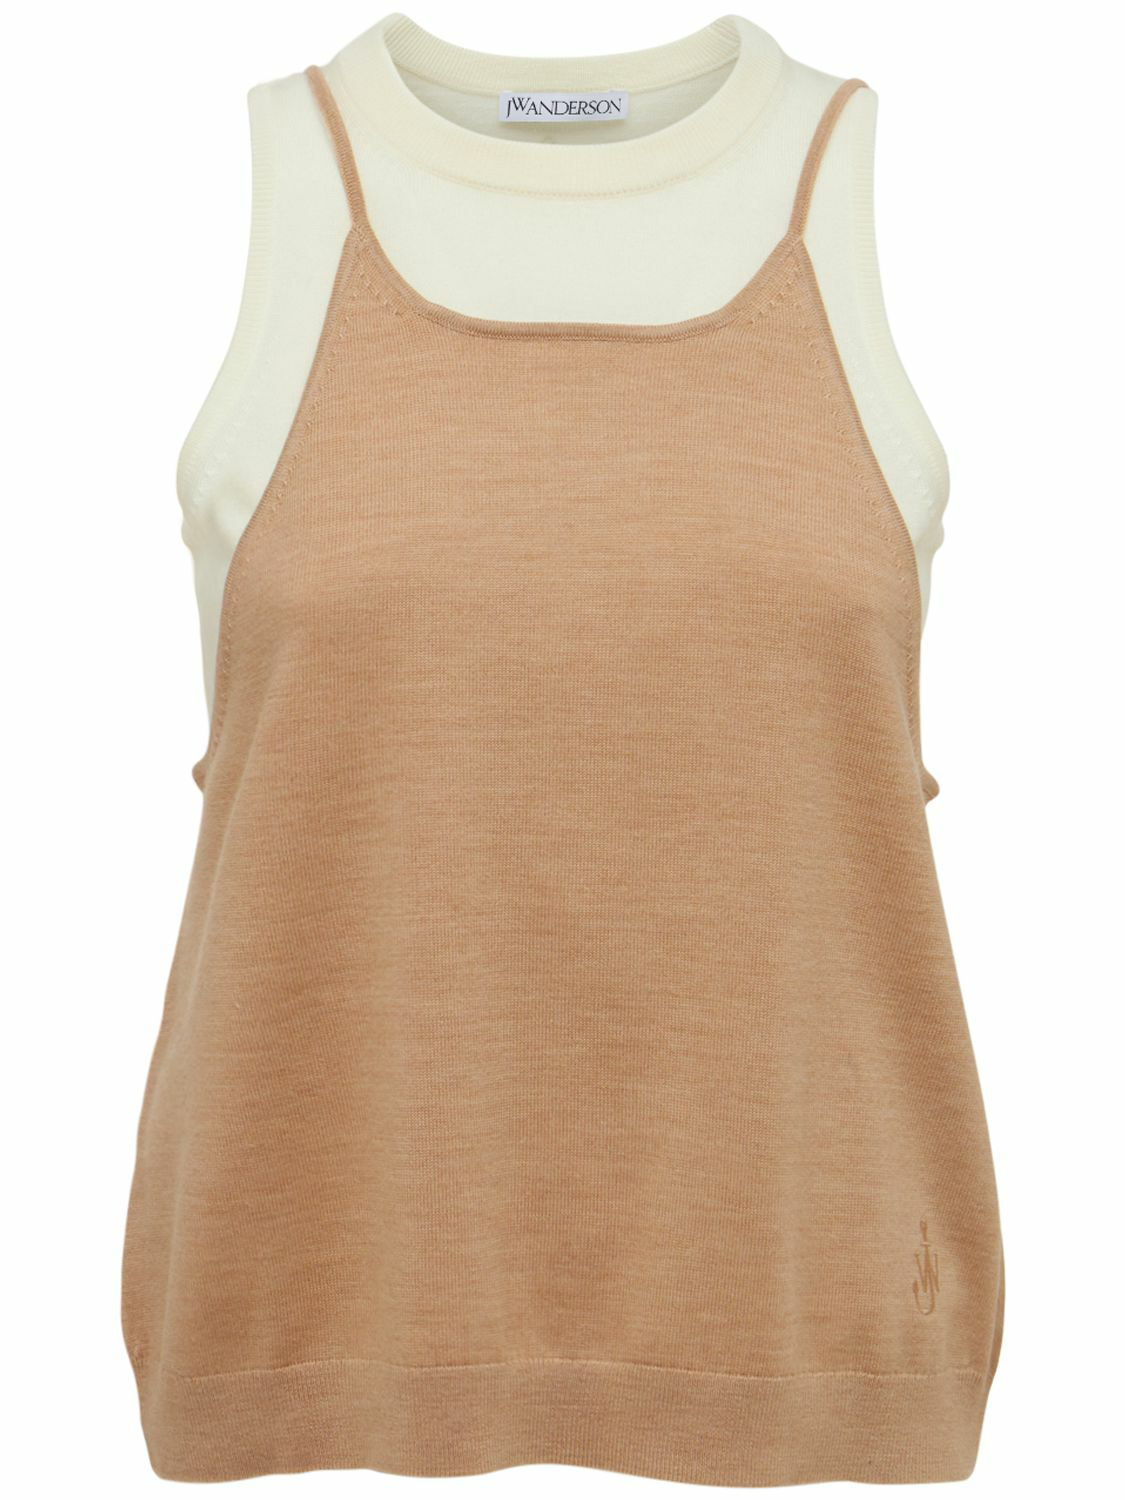 Photo: JW ANDERSON Layered Two-in-one Wool Knit Tank Top